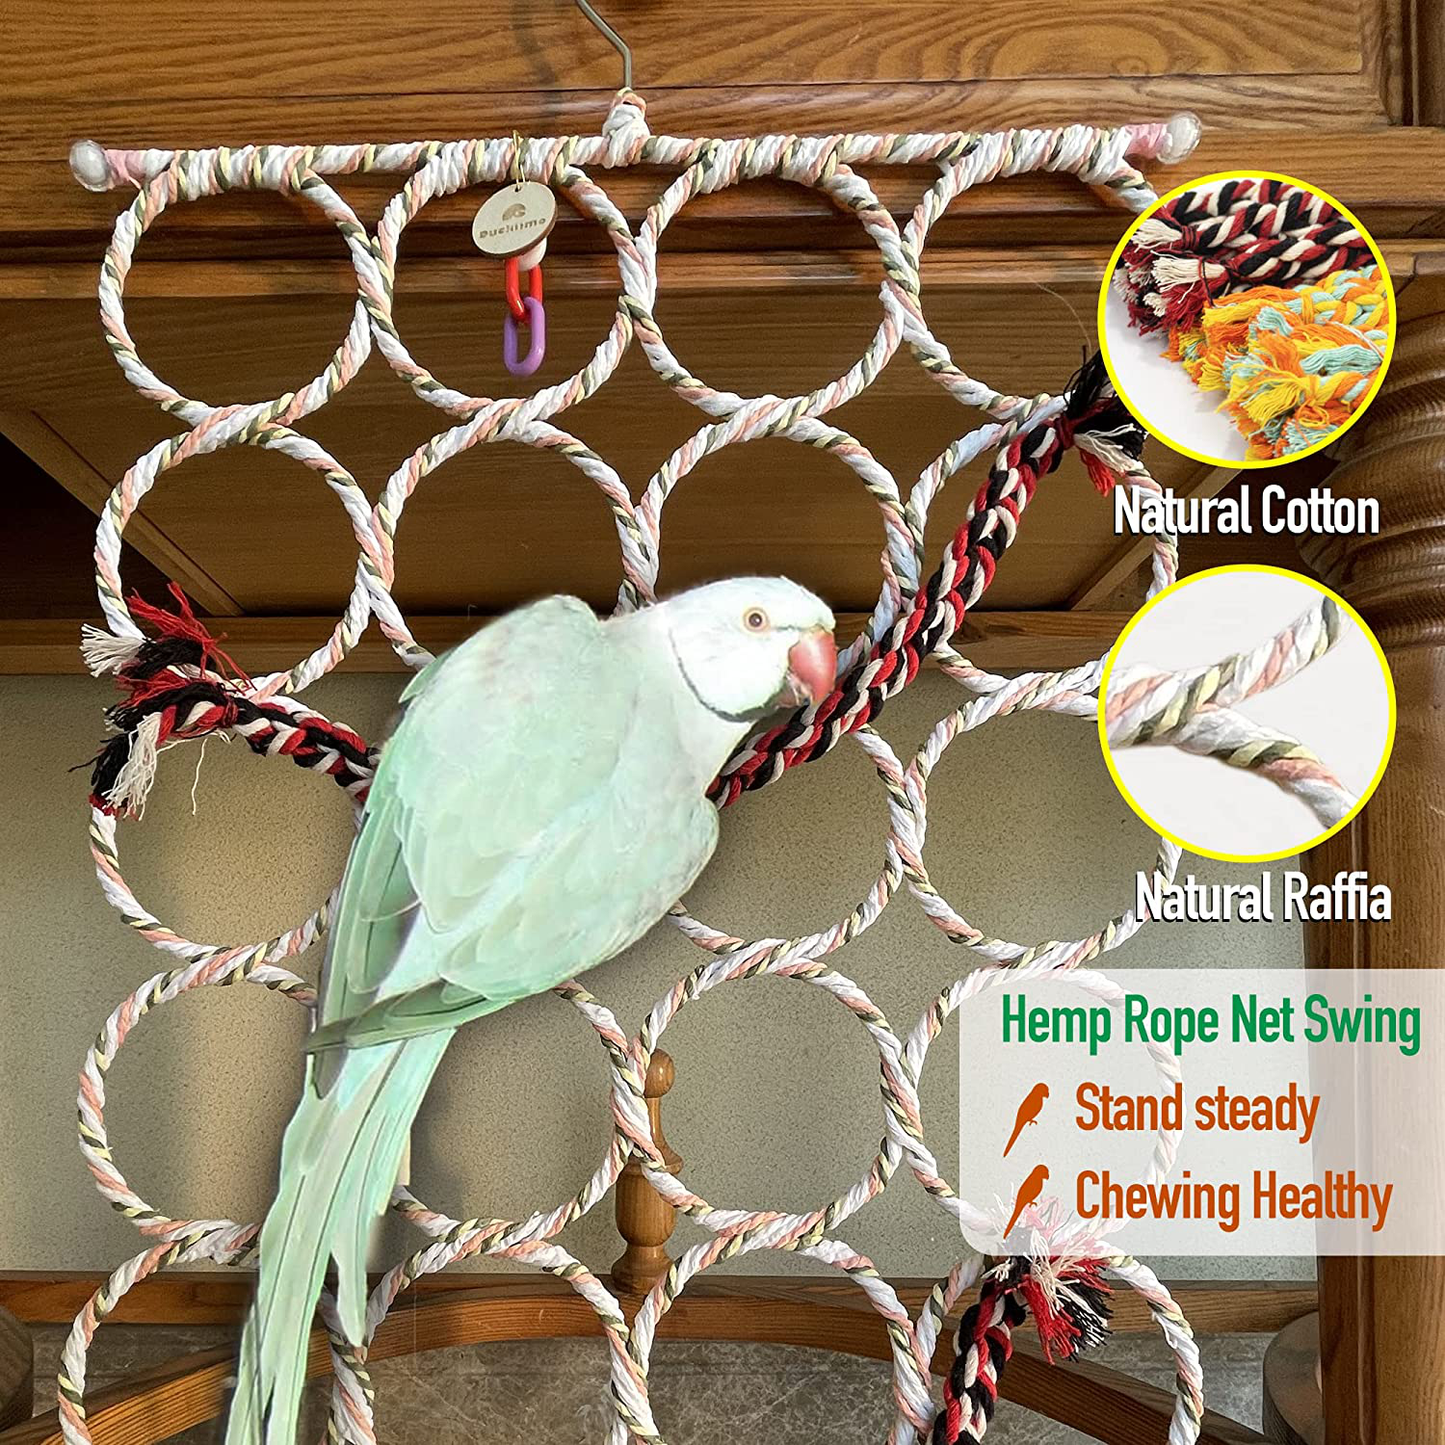 Duckiimo 3Pack Parrot Climbing Net Toys-Bird Rope Ladder Bungee Toy-Bird Swing Hanging Cage-Perch Stand Chew Toys for Parrot, Cockatiel, Parakeets, Cockatoos, Budgies, Conure, Macaw